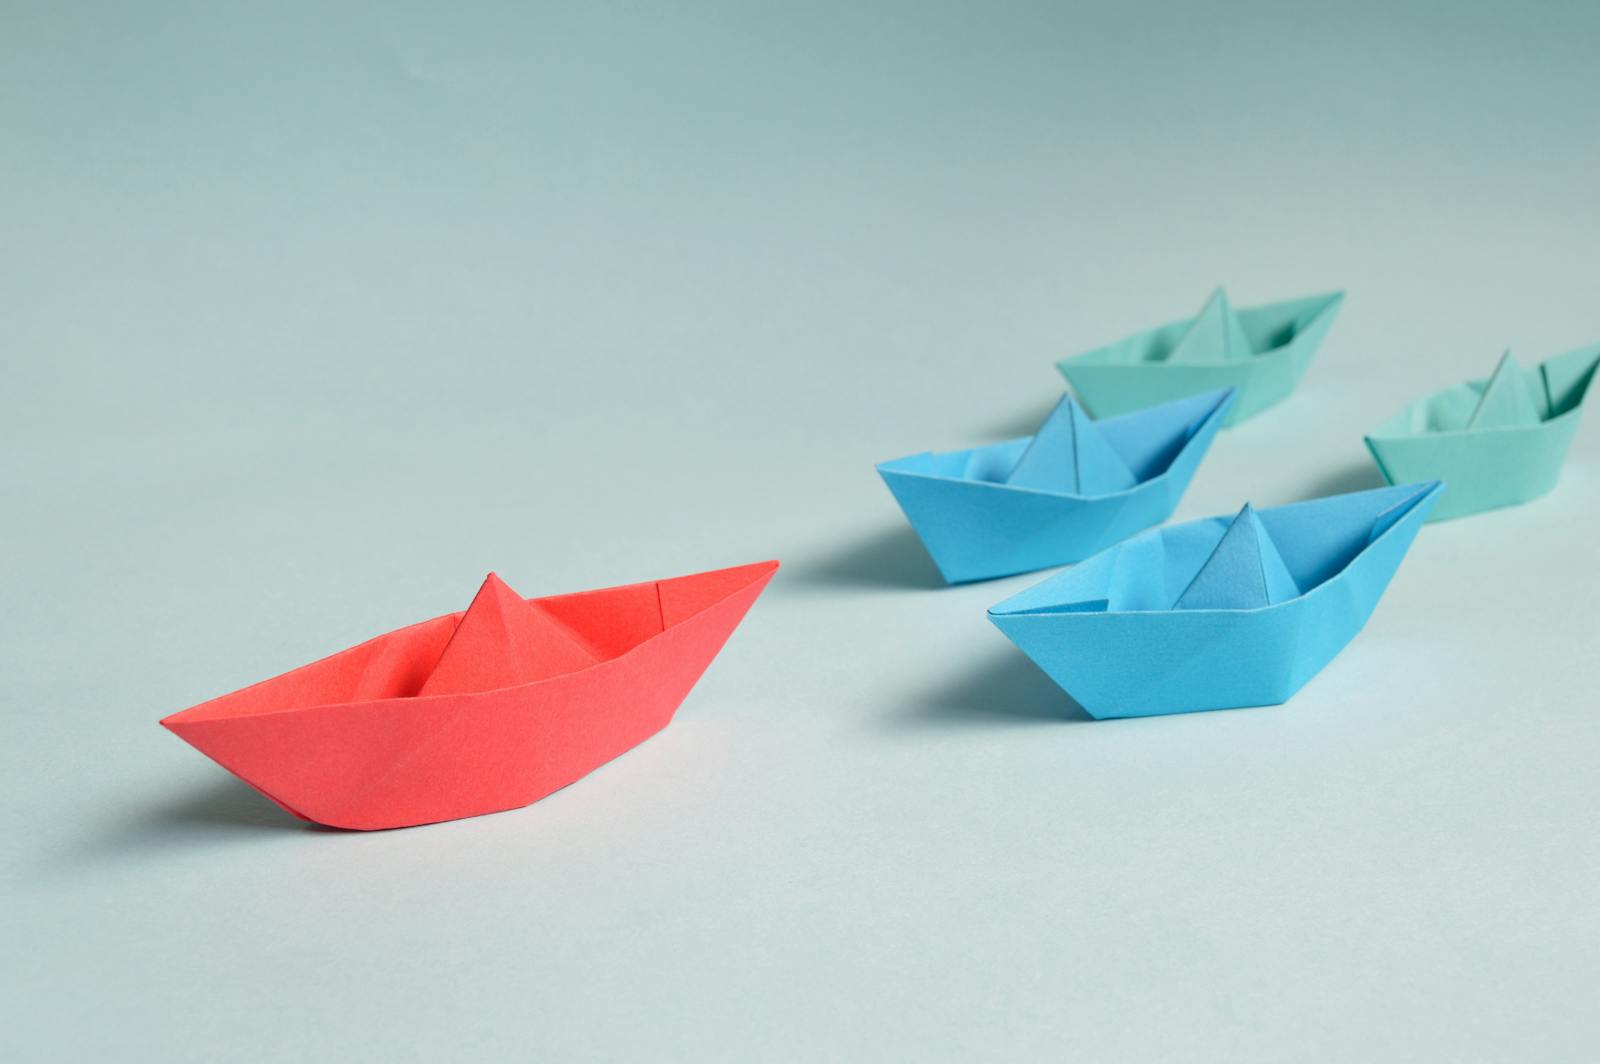 Leadership Photo by Miguel Á. Padriñán from Pexels: https://www.pexels.com/photo/paper-boats-on-solid-surface-194094/